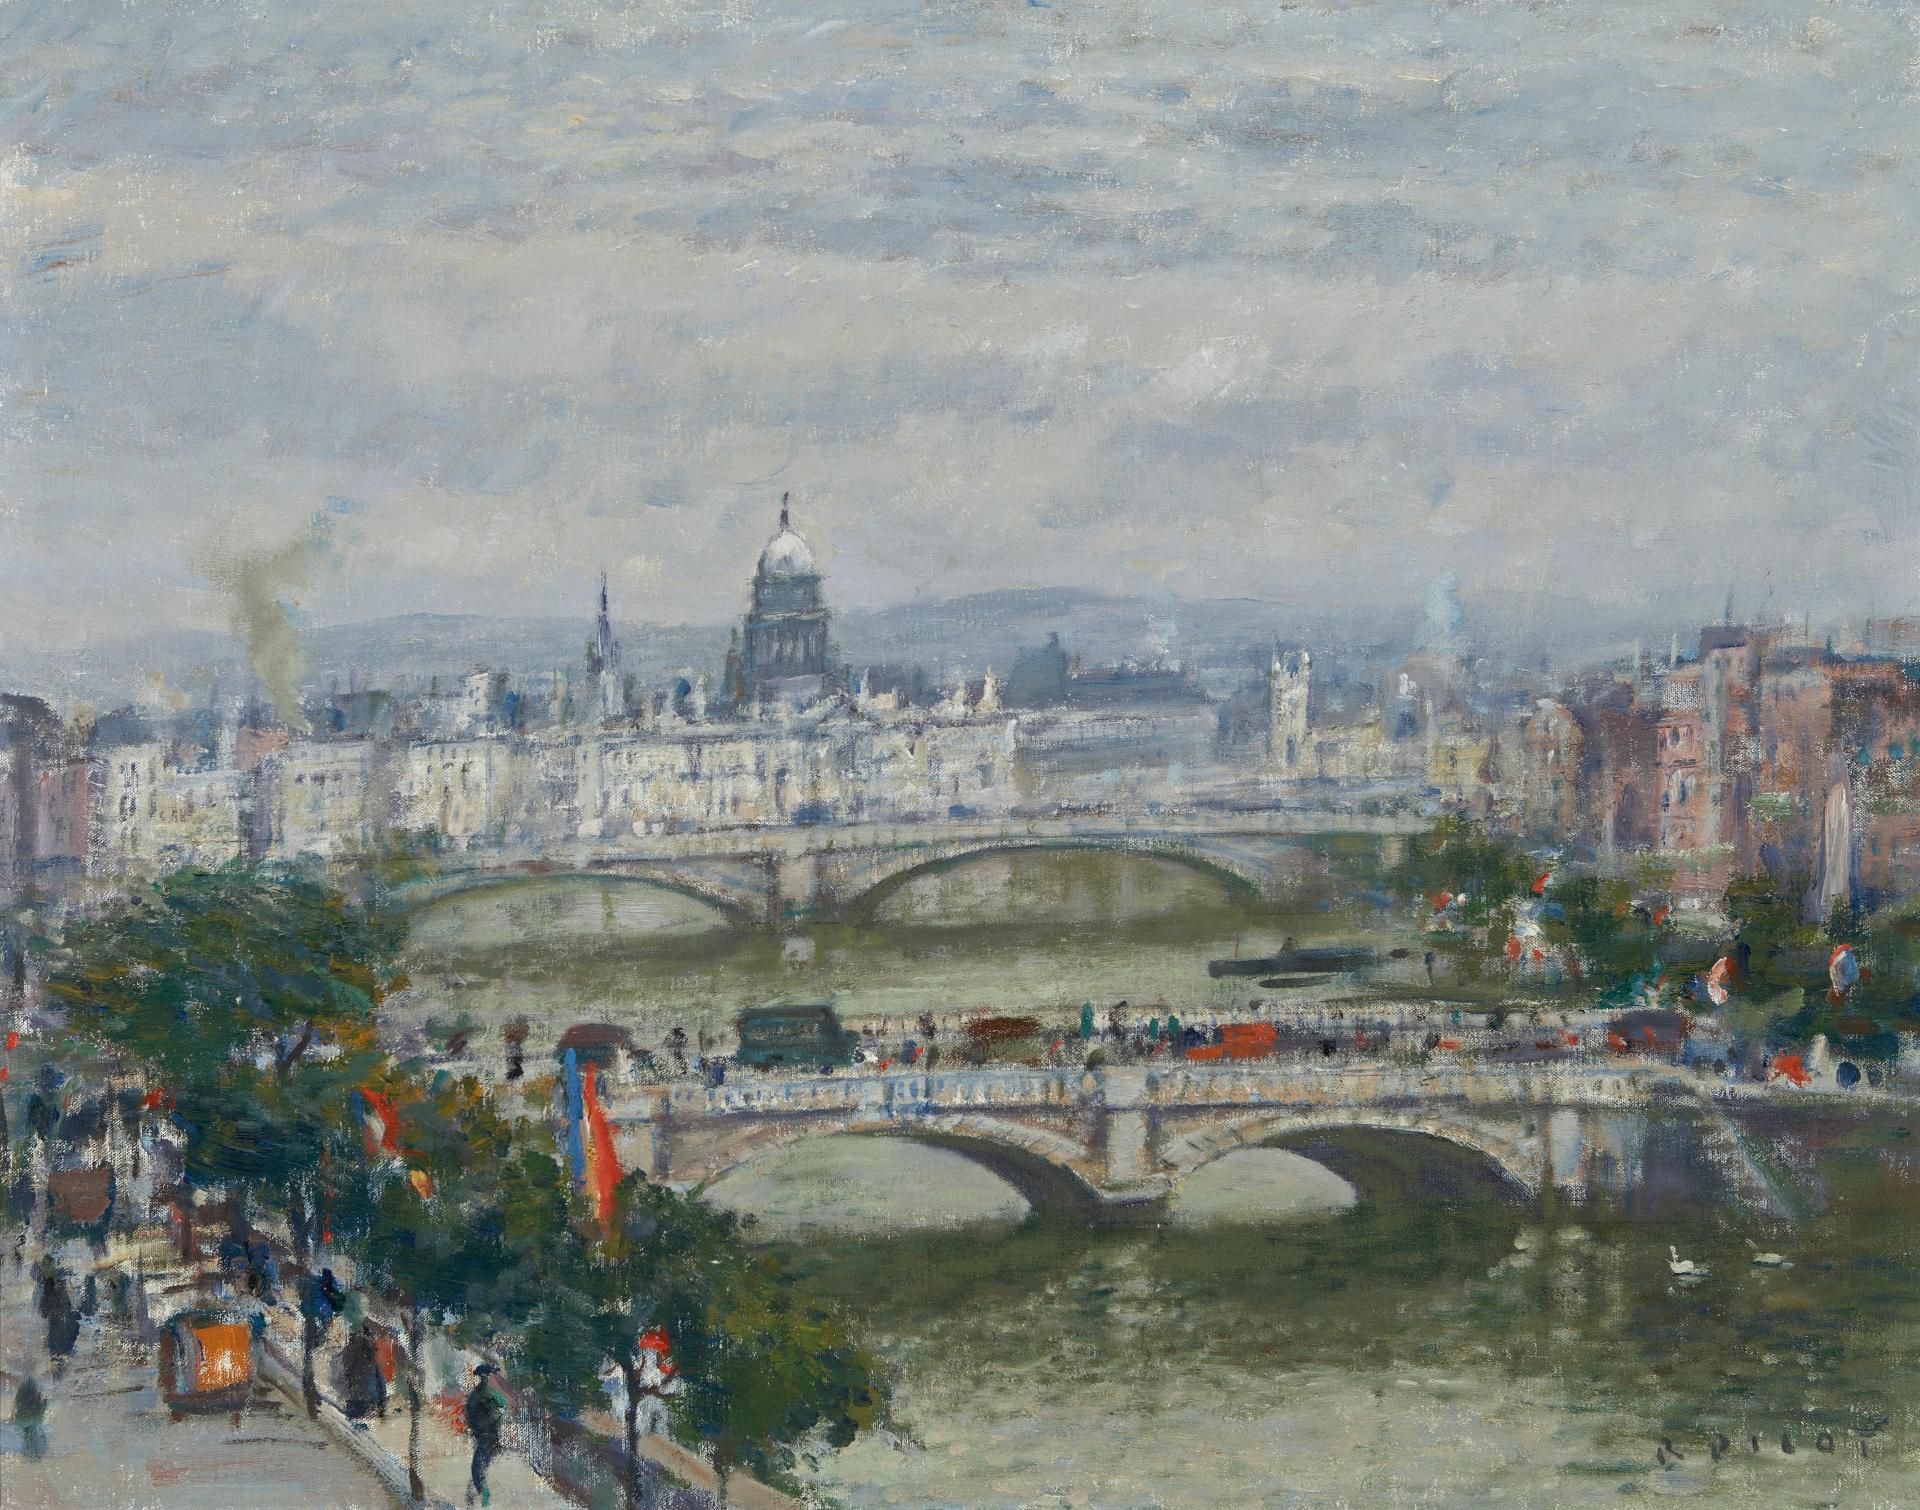 Robert Wakeham Pilot (1898-1967) - A view of Paris, looking over the Pont Neuf to Les Invalides